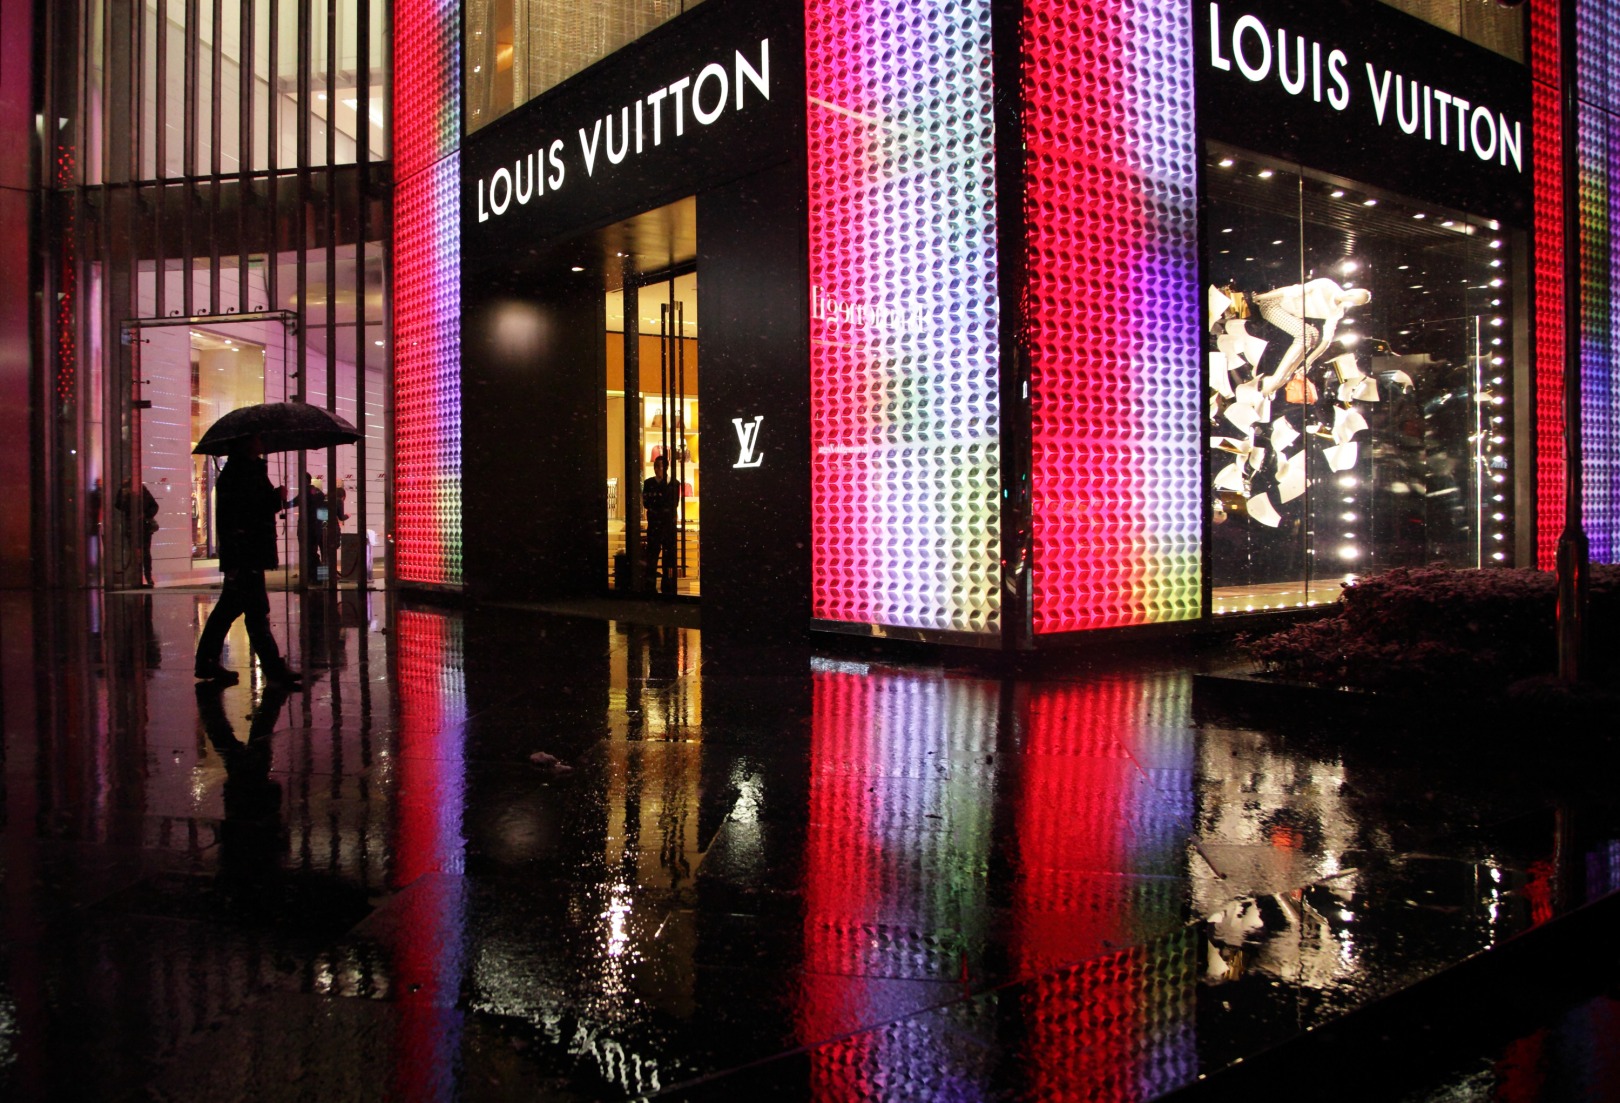 Louis Vuitton takes on Apple Watch with this $2,450 Android Wear smartwatch